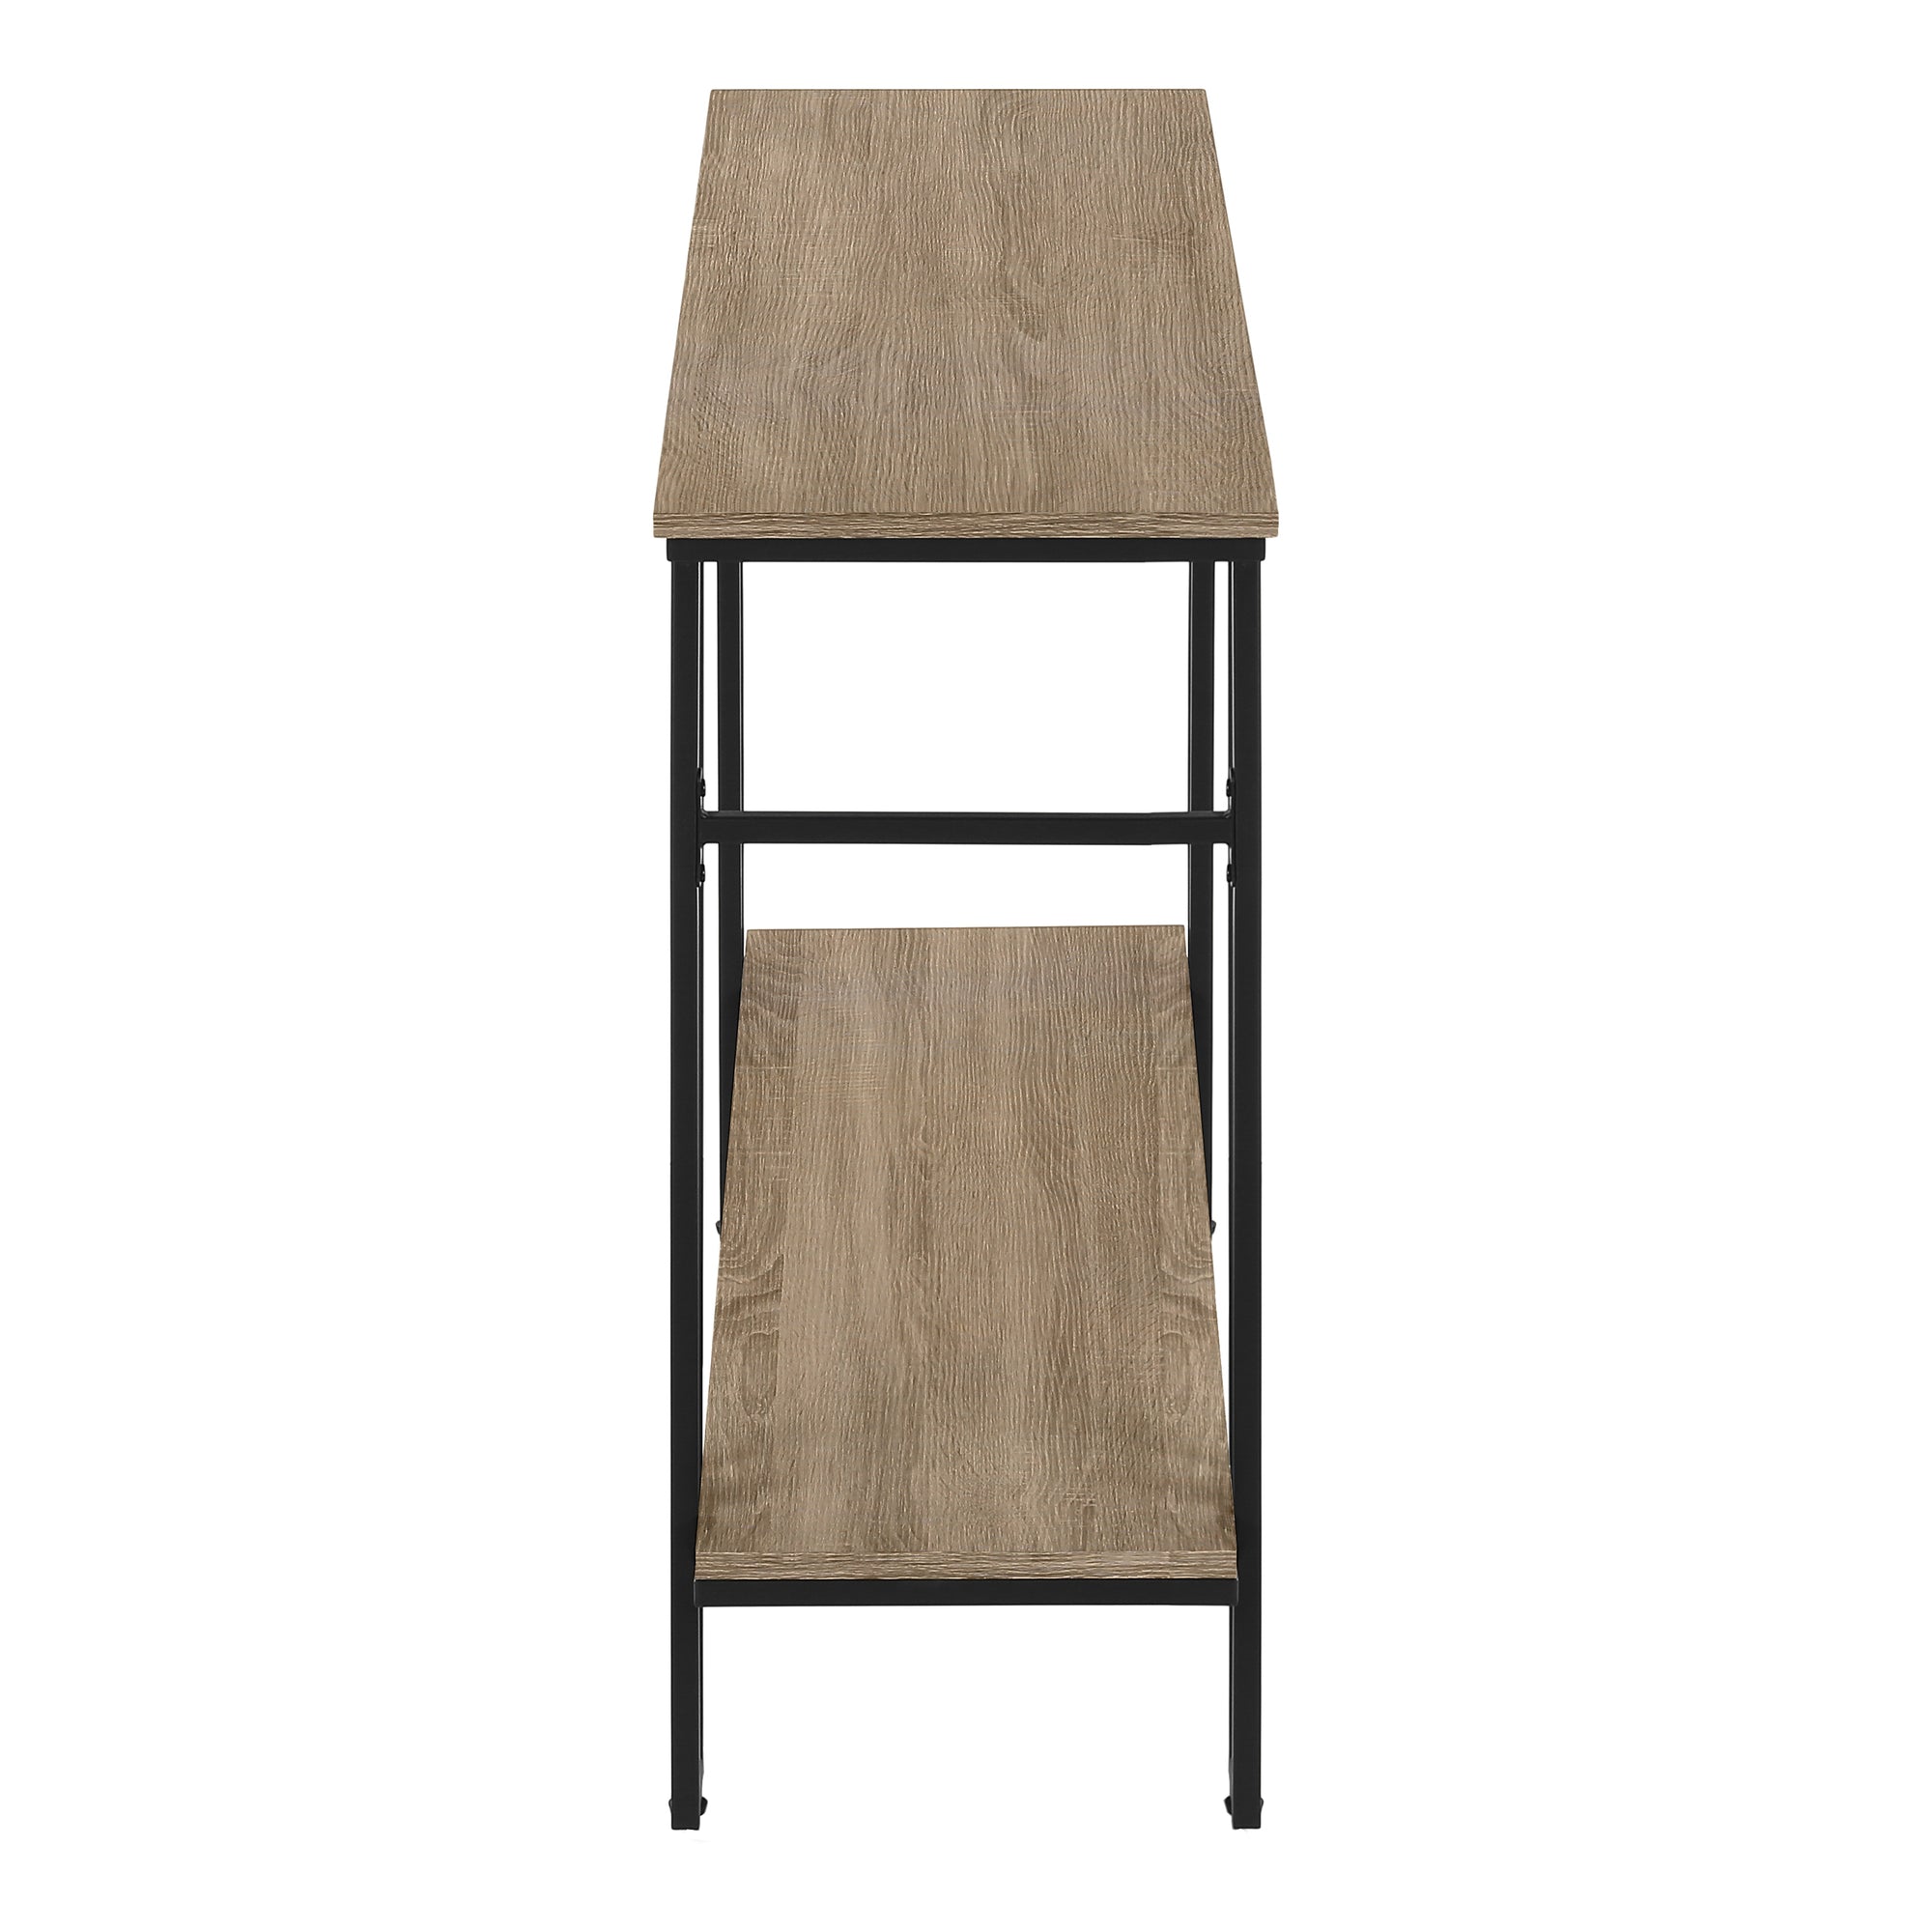 MN-403577    Accent Table, Console, Entryway, Narrow, Sofa, Living Room, Bedroom, Metal Frame, Laminate, Dark Taupe, Black, Contemporary, Modern